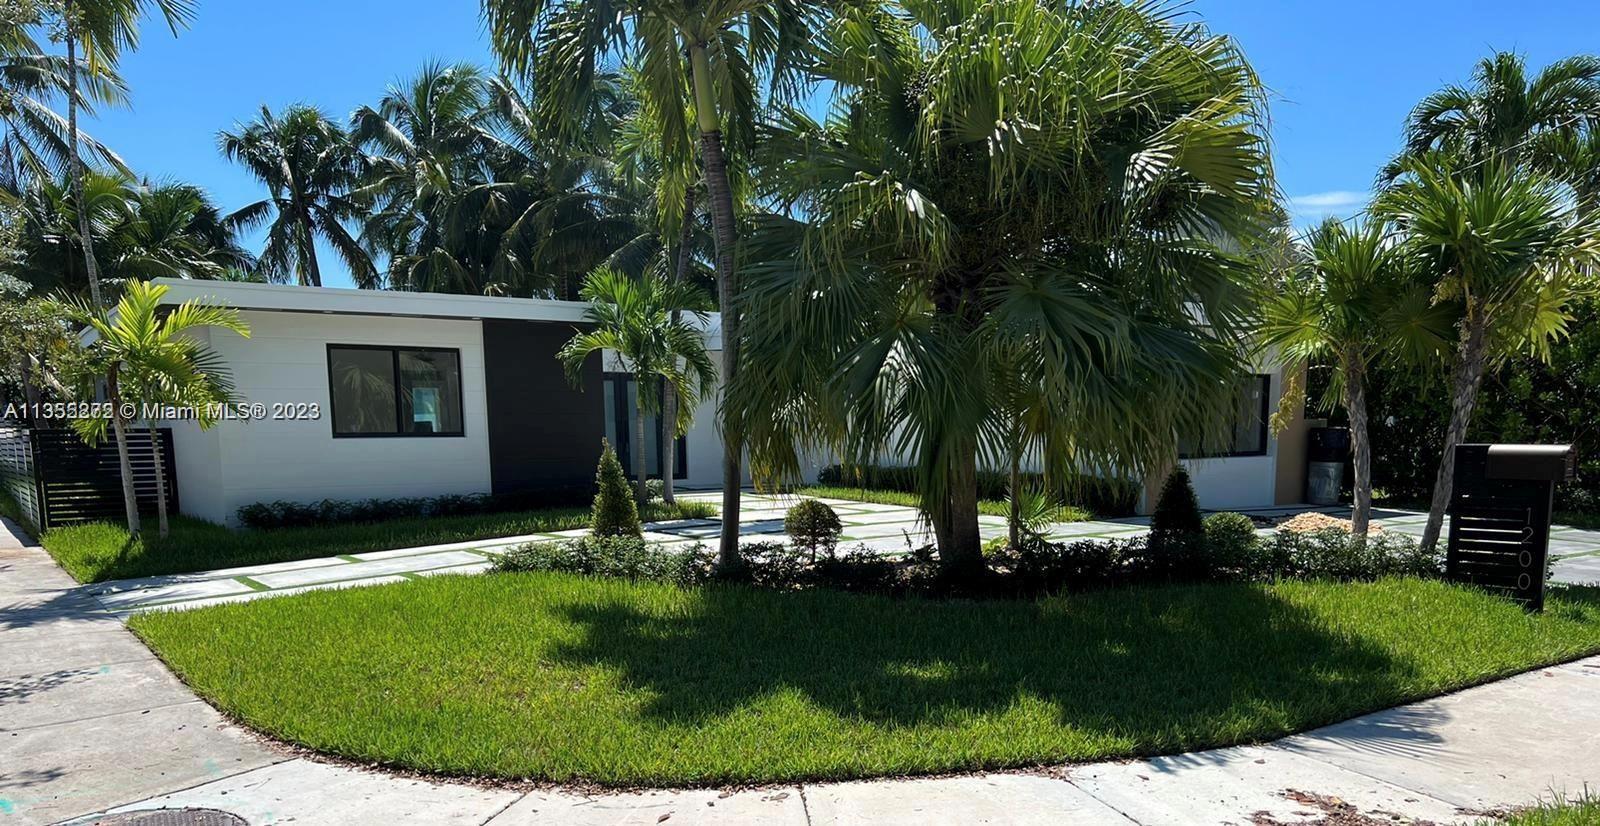 Waterfront home located in Miami Beach's hidden island of Biscayne Point with canal access to the Mi